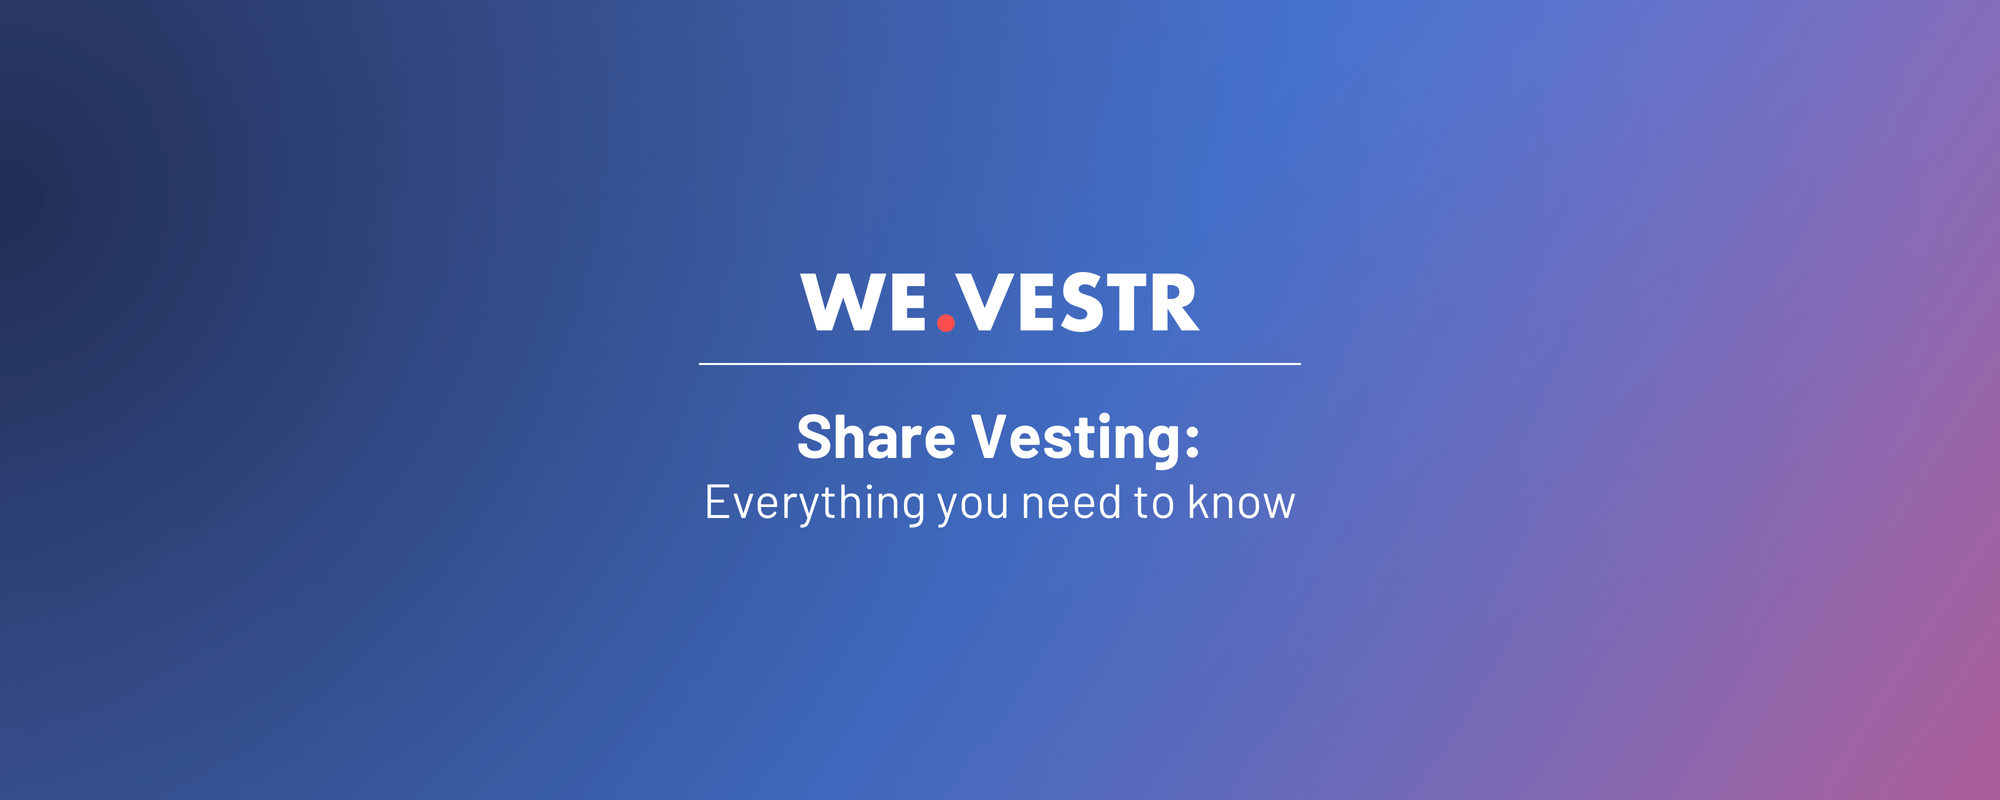 What is Share Vesting and how it affect me as a Founder?